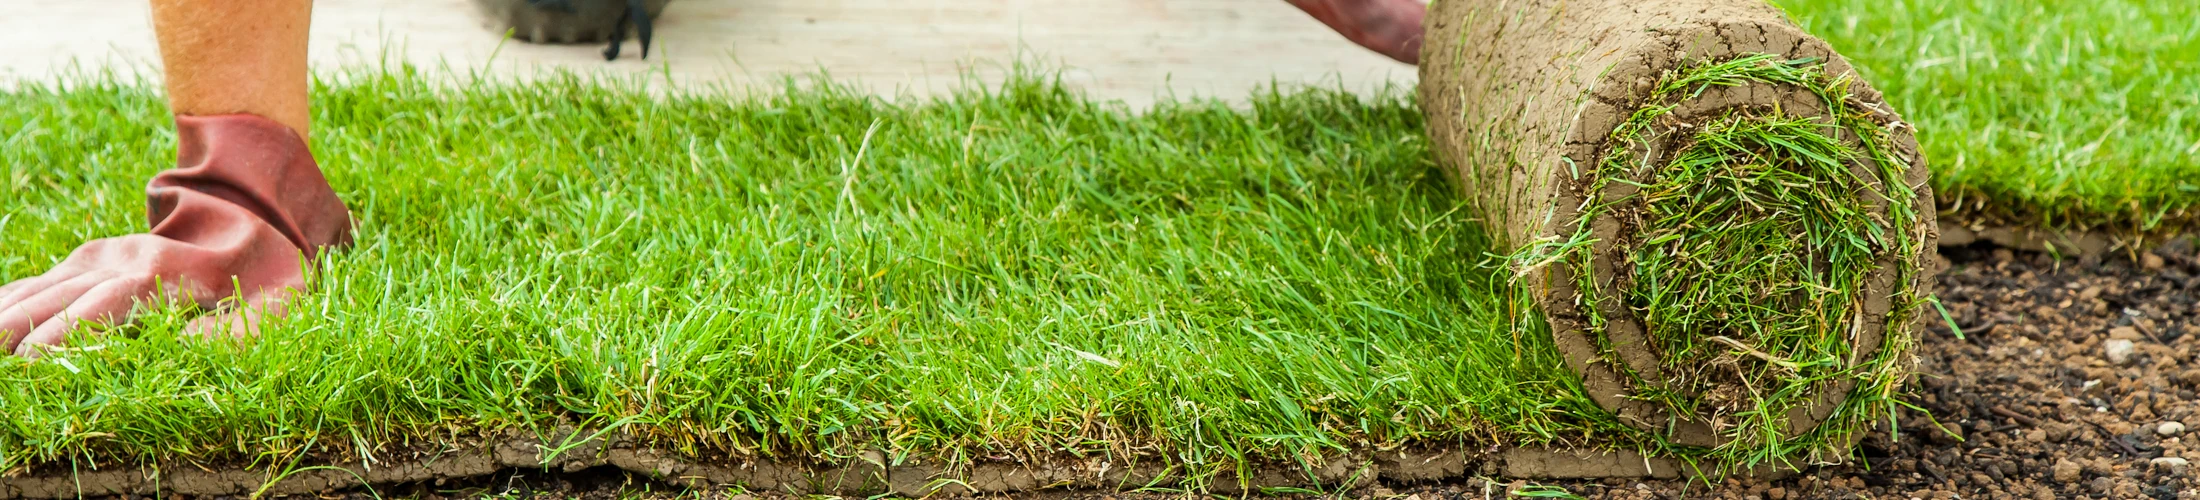 Lawn Sod Installation Experts